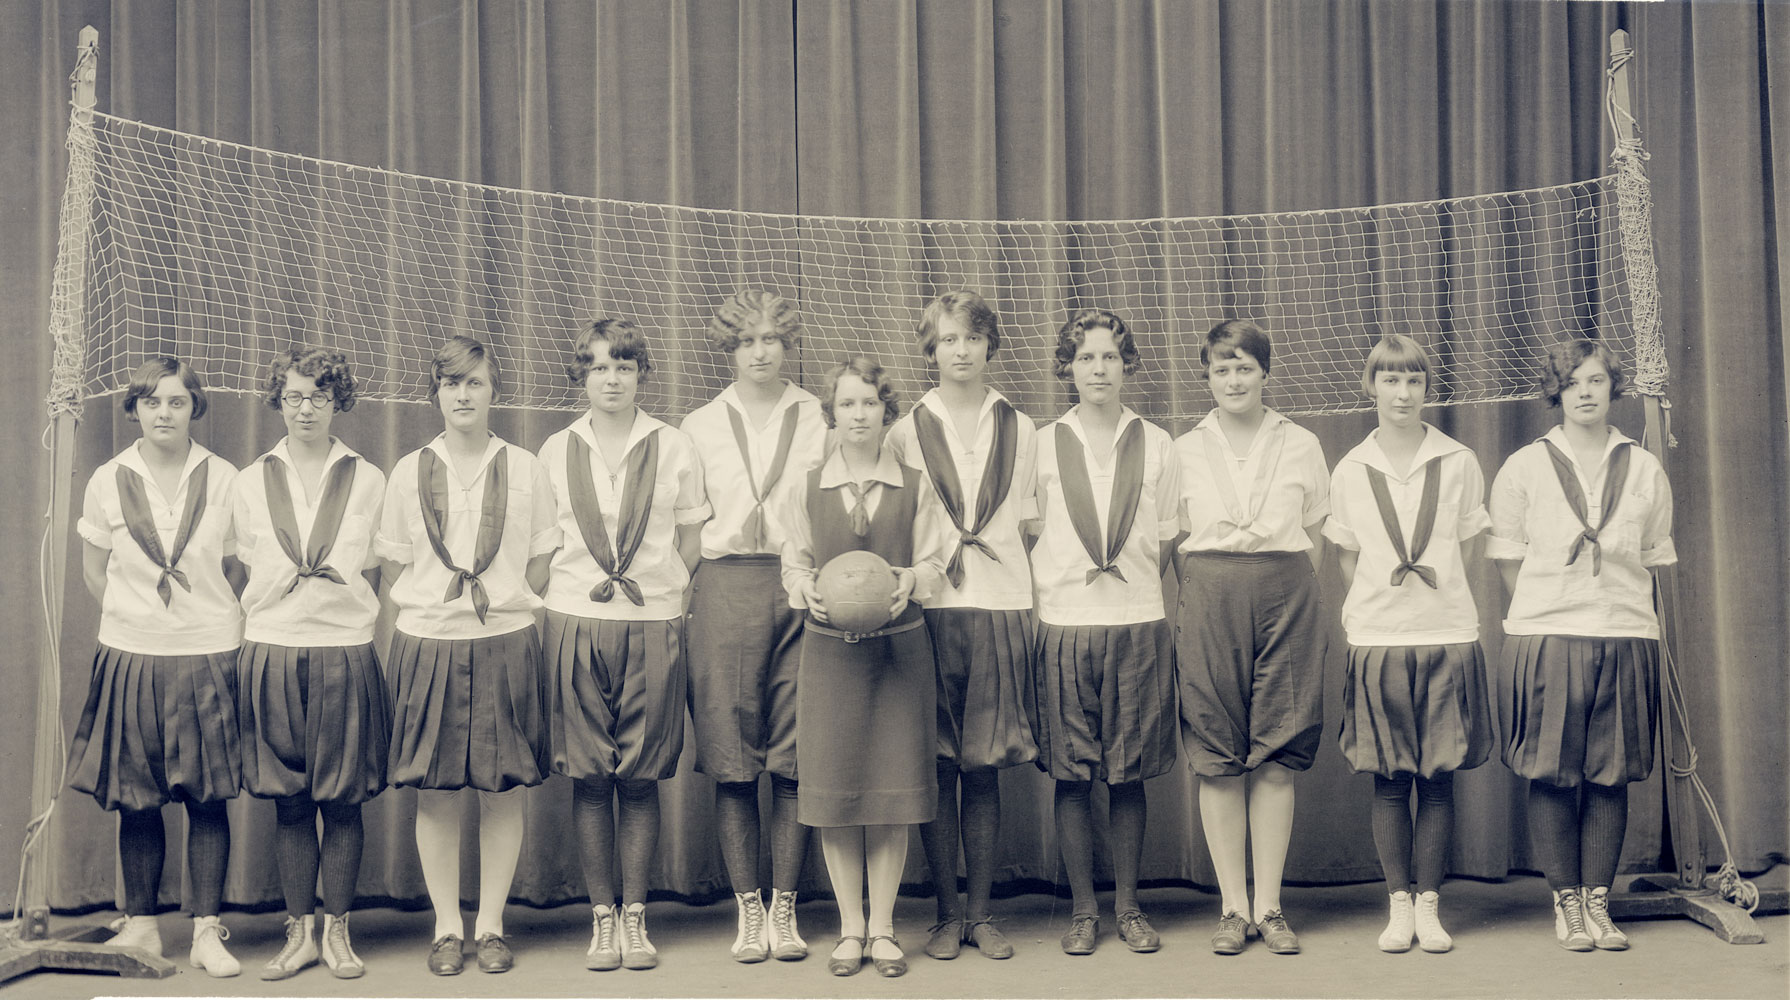 A black and white group portrait of a volleyball team